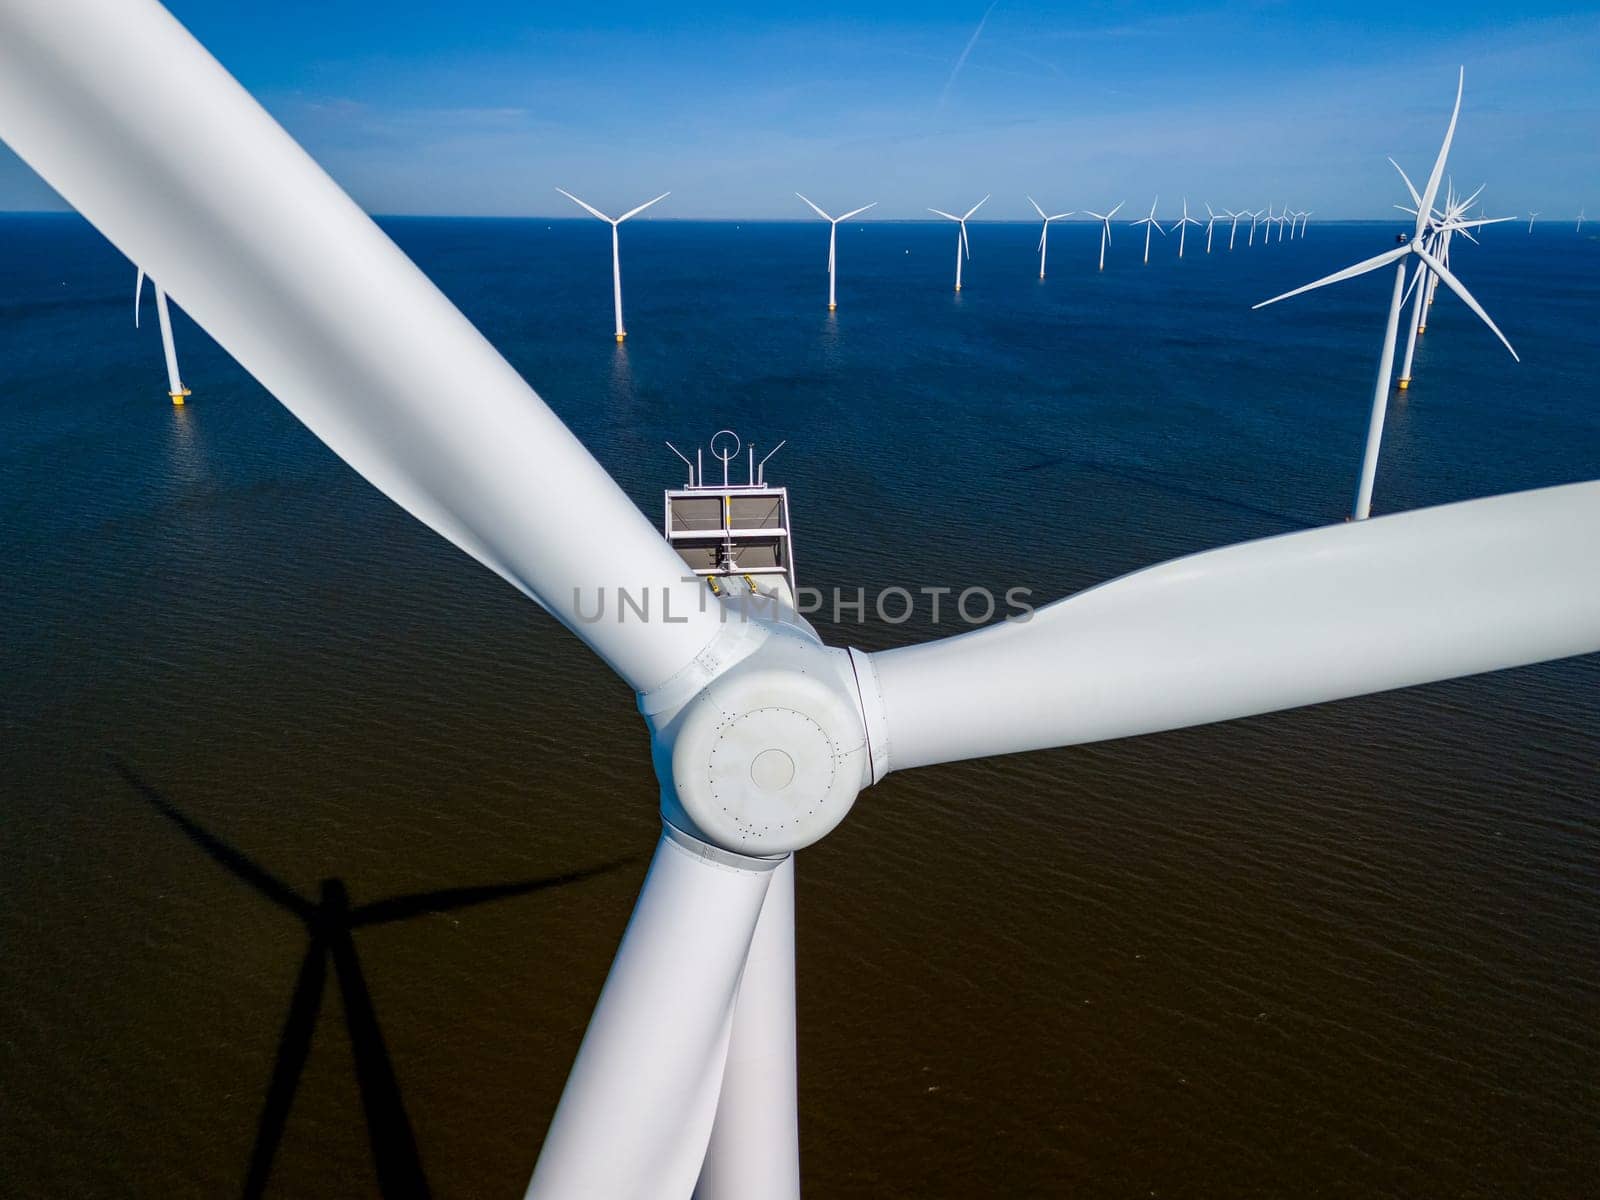 A wind farm off the coast of the Netherlands in Flevoland,wind turbines on the horizon by fokkebok